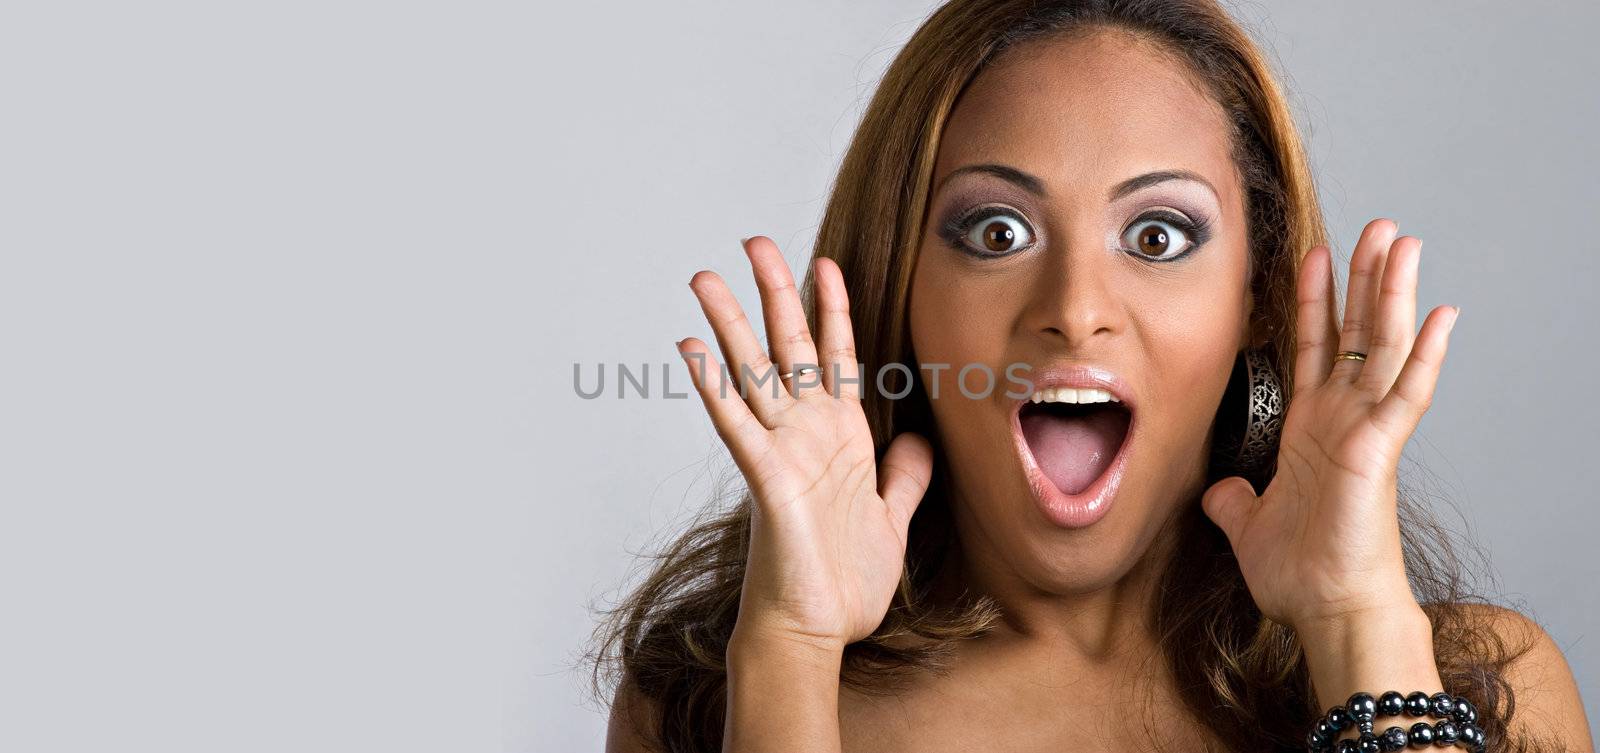 An amazed and shocked woman isolated over a silver background.  Lots of copy space for your text.